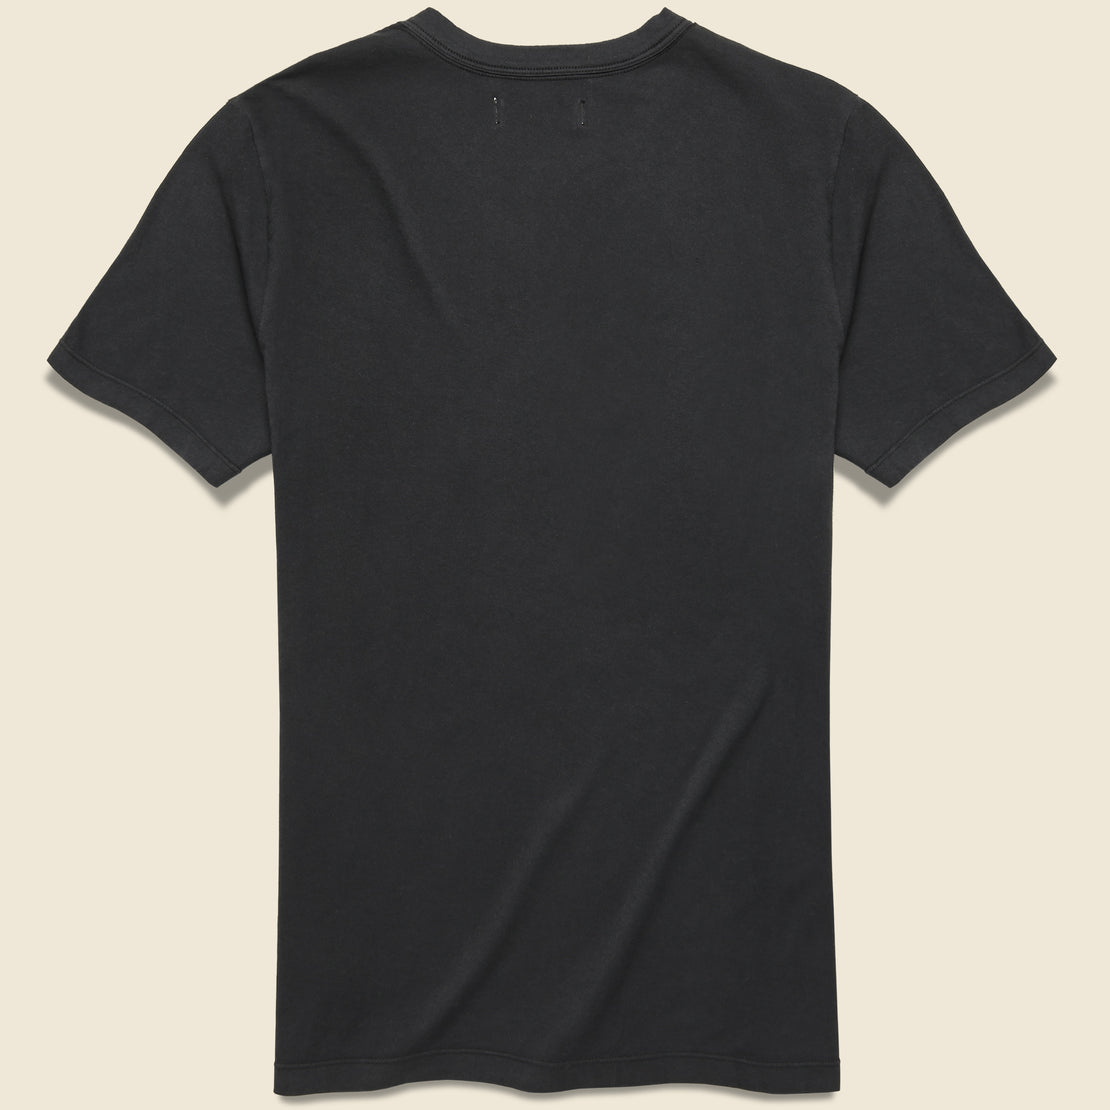 Headed Nowhere Tee - Black - Imogene + Willie - STAG Provisions - Tops - S/S Tee - Graphic